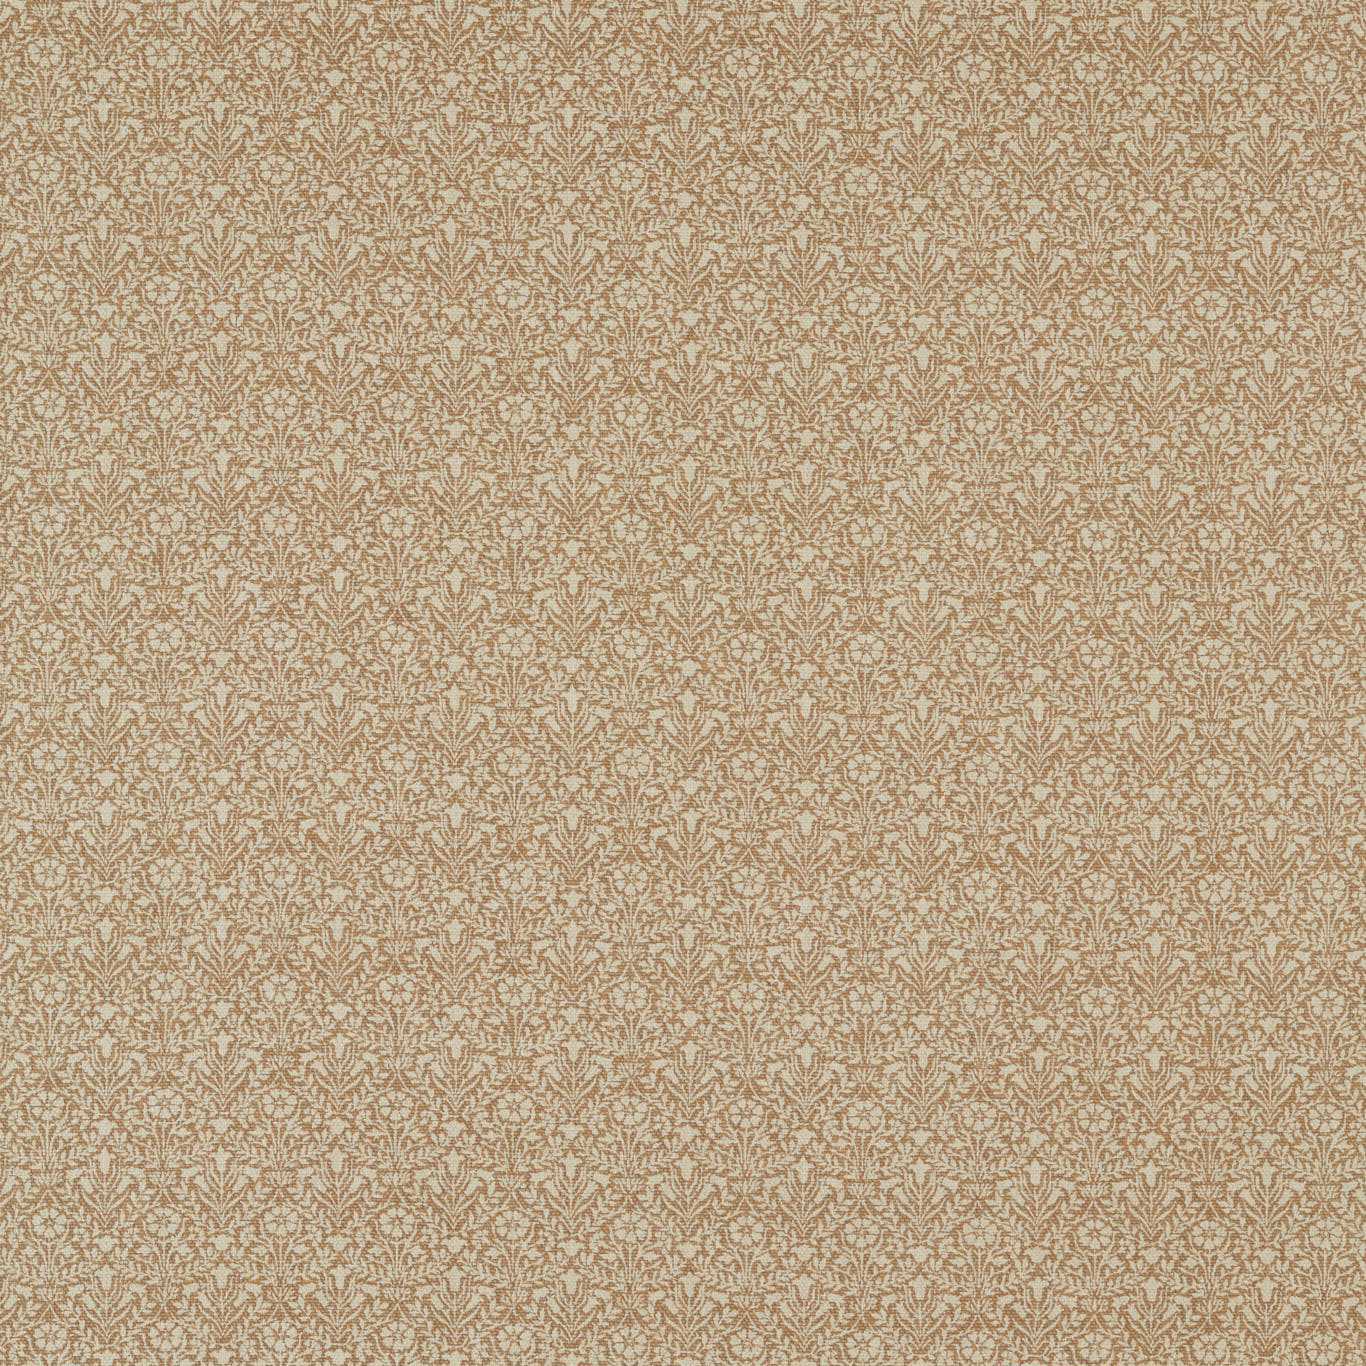 Bellflowers Weave Wheat Fabric by MOR